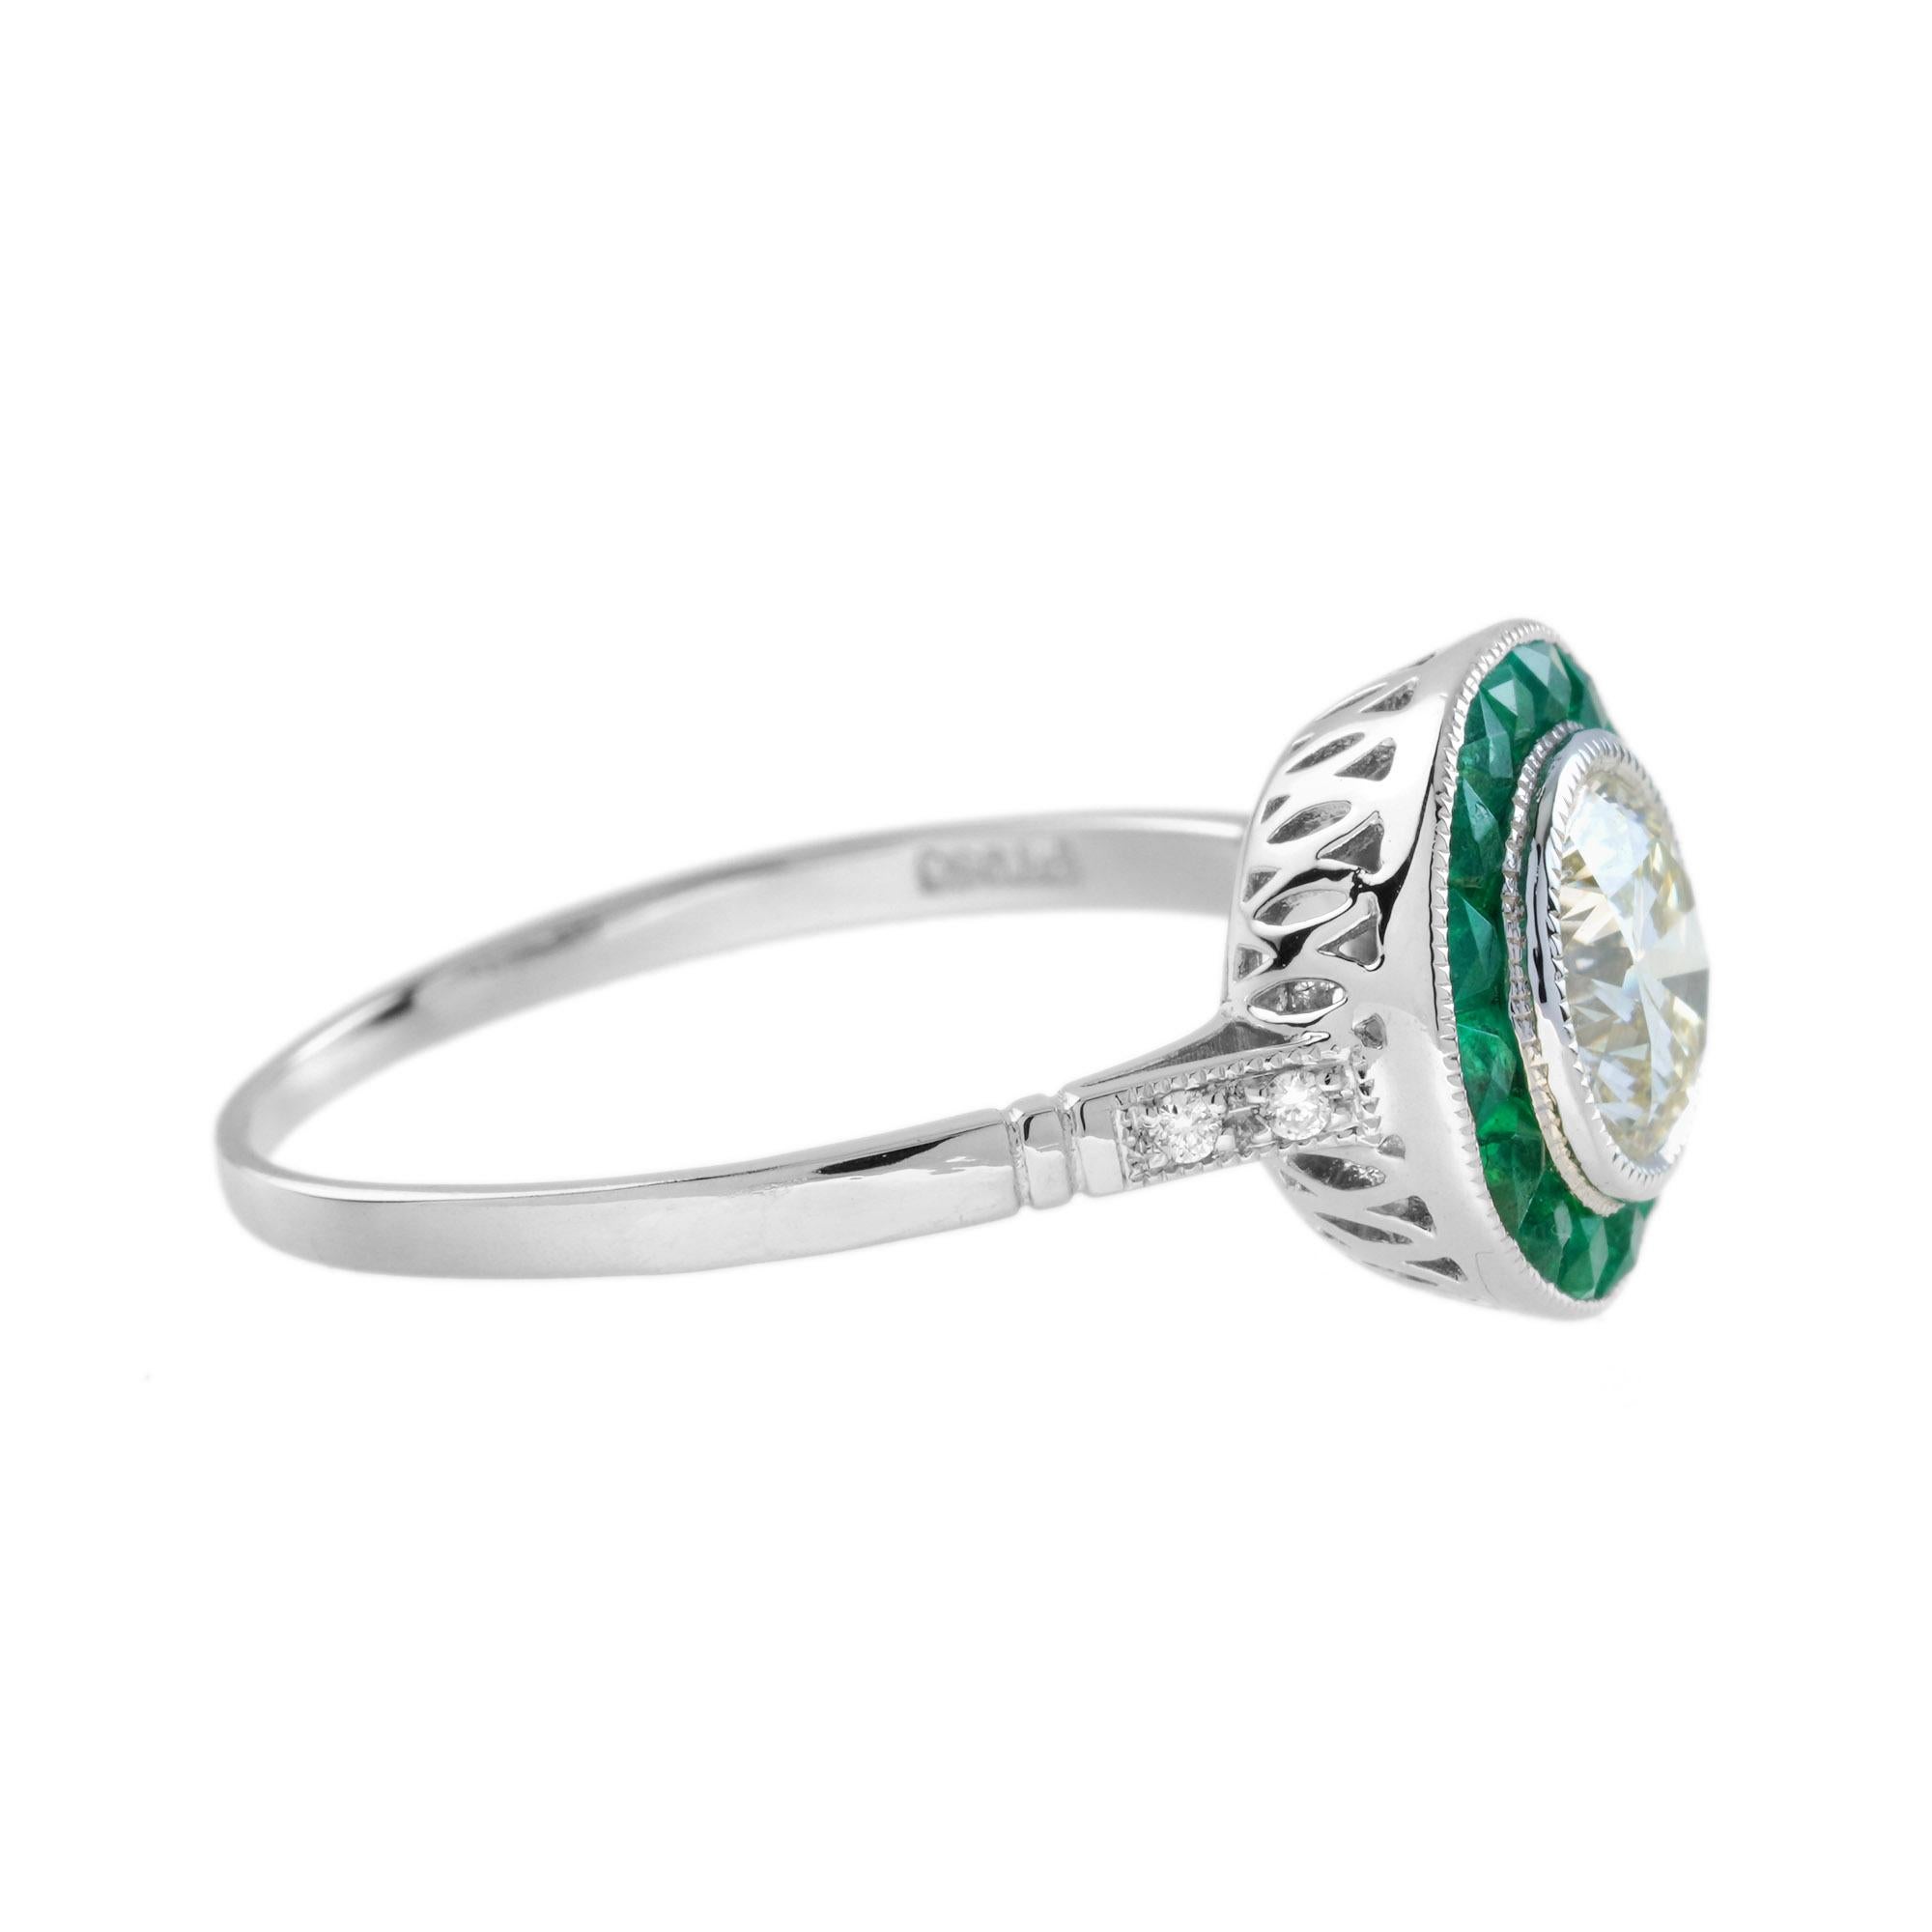 Round Cut Certified 1 Ct. Diamond and Emerald Art Deco Style Target Ring in Platinum 950 For Sale